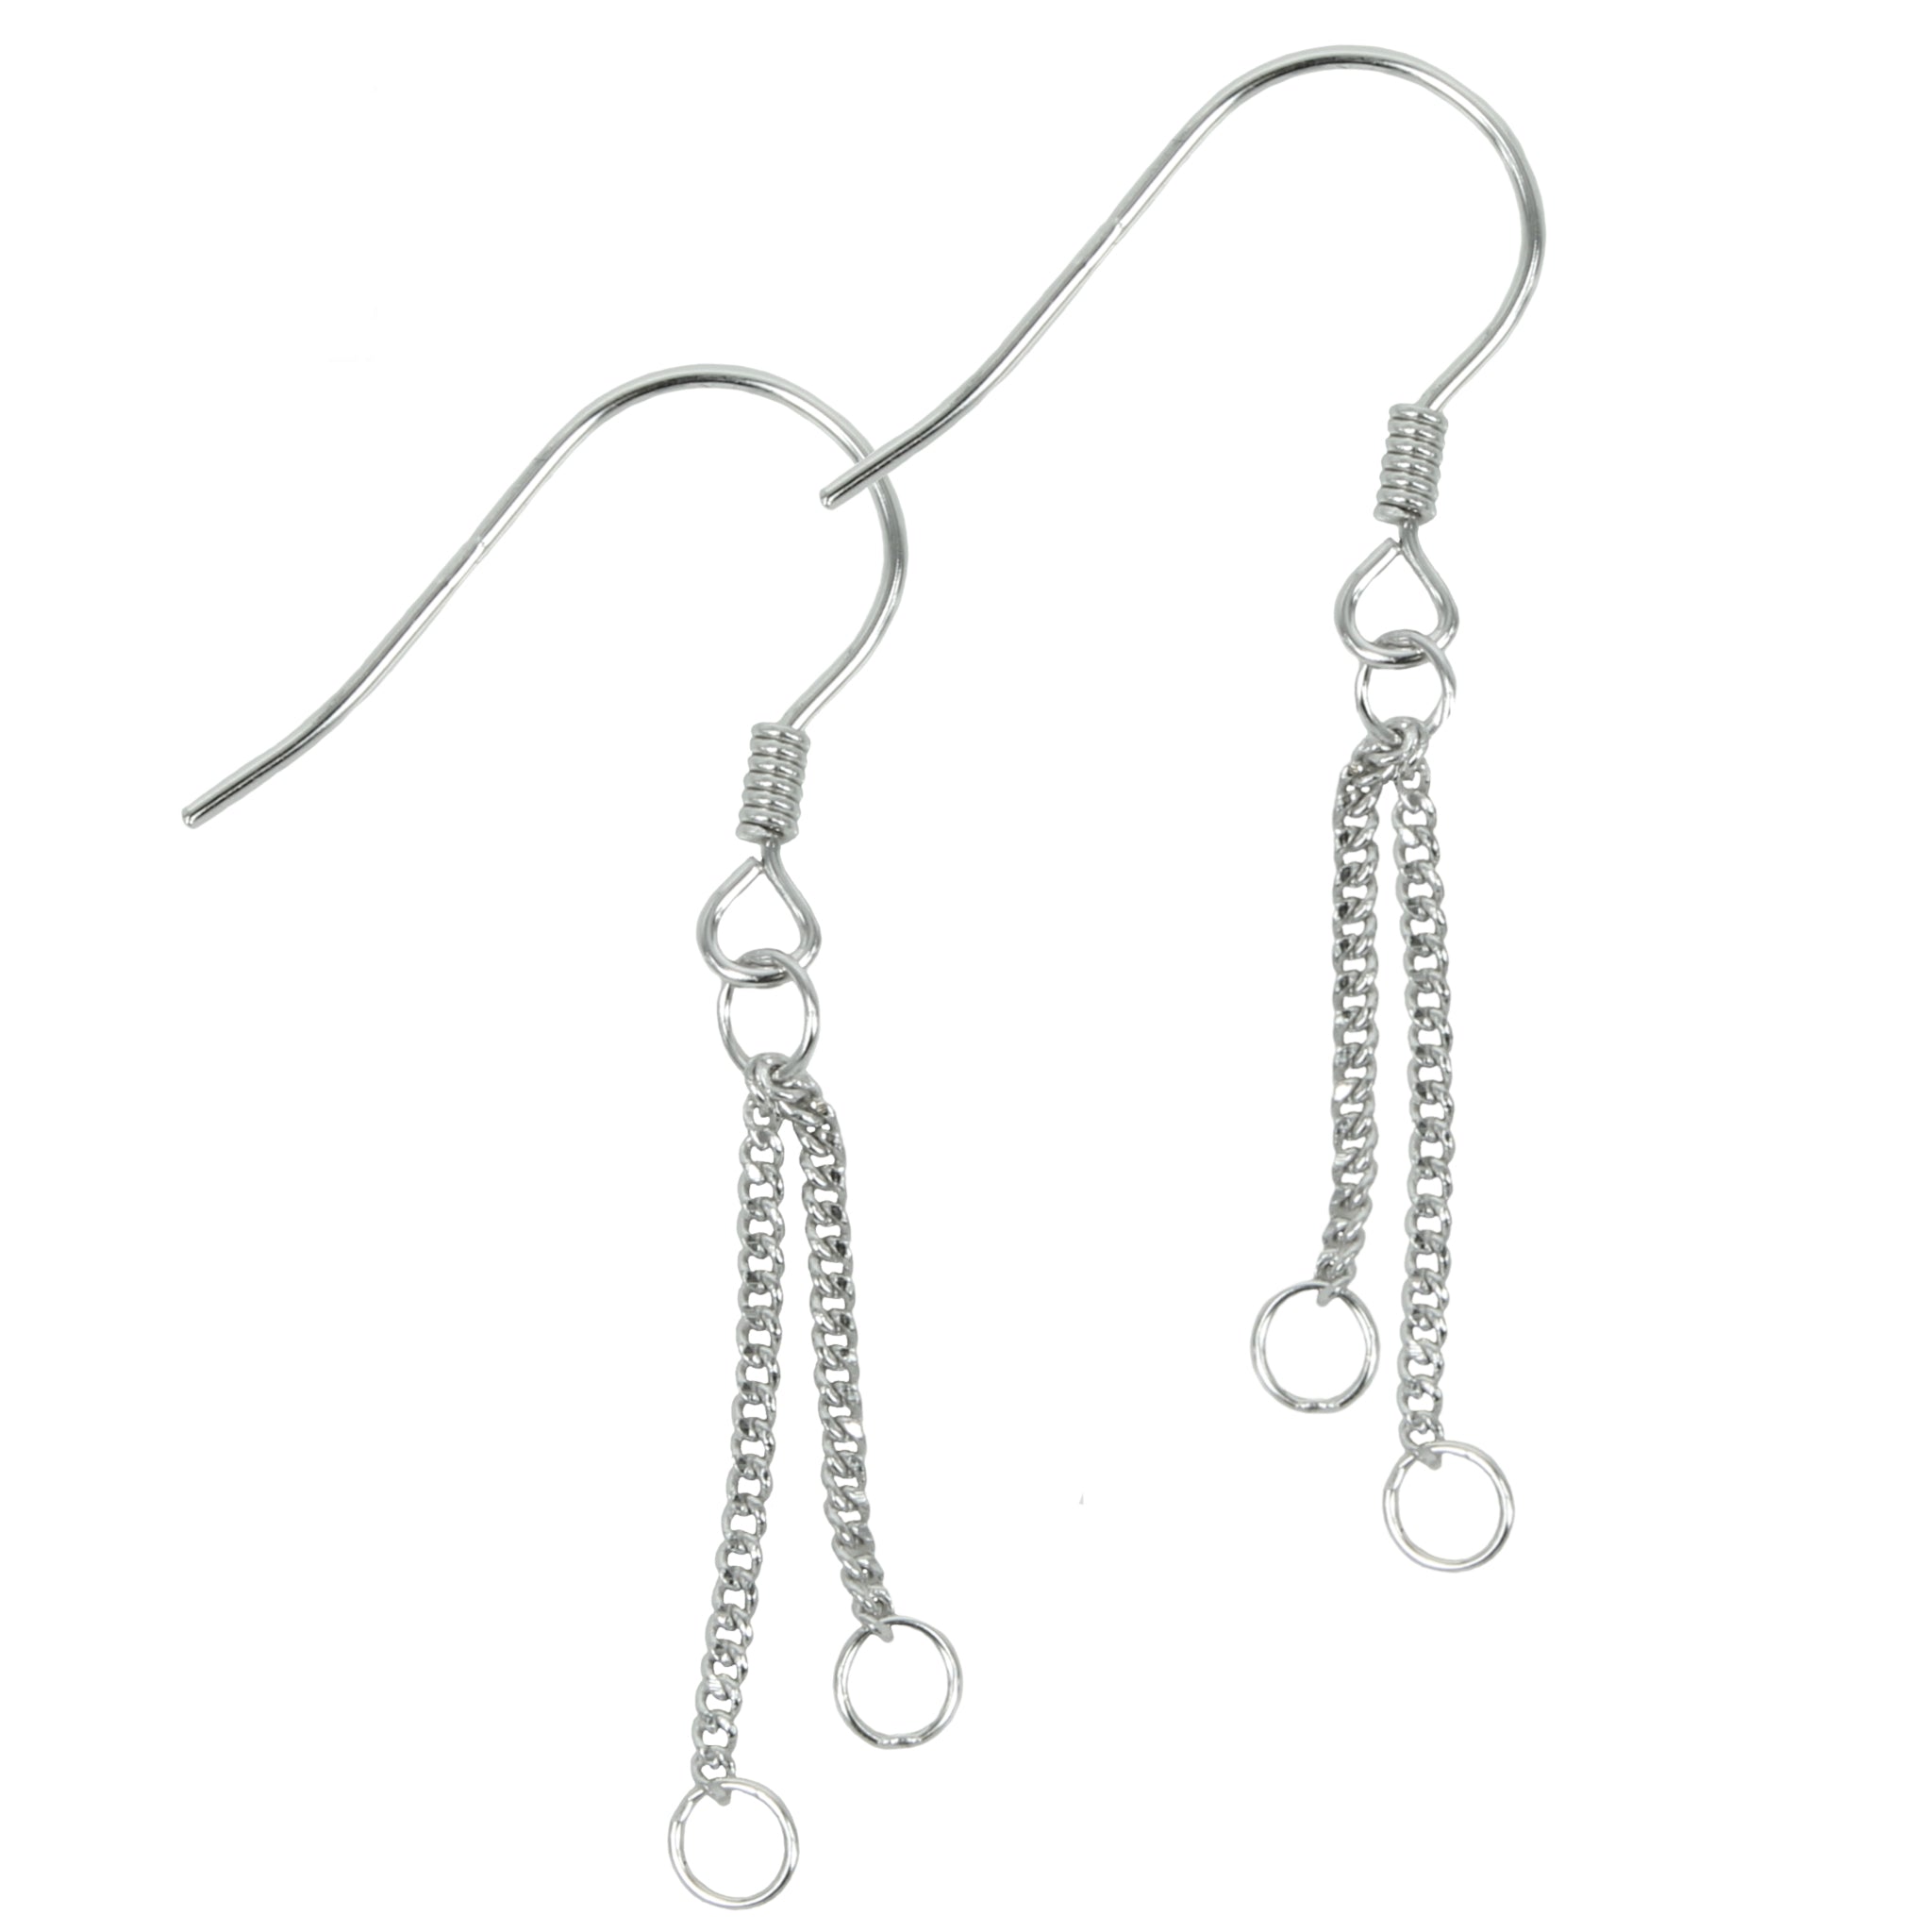 Earrings with Two Chain Dangles with Loops in Sterling Silver 36x3mm